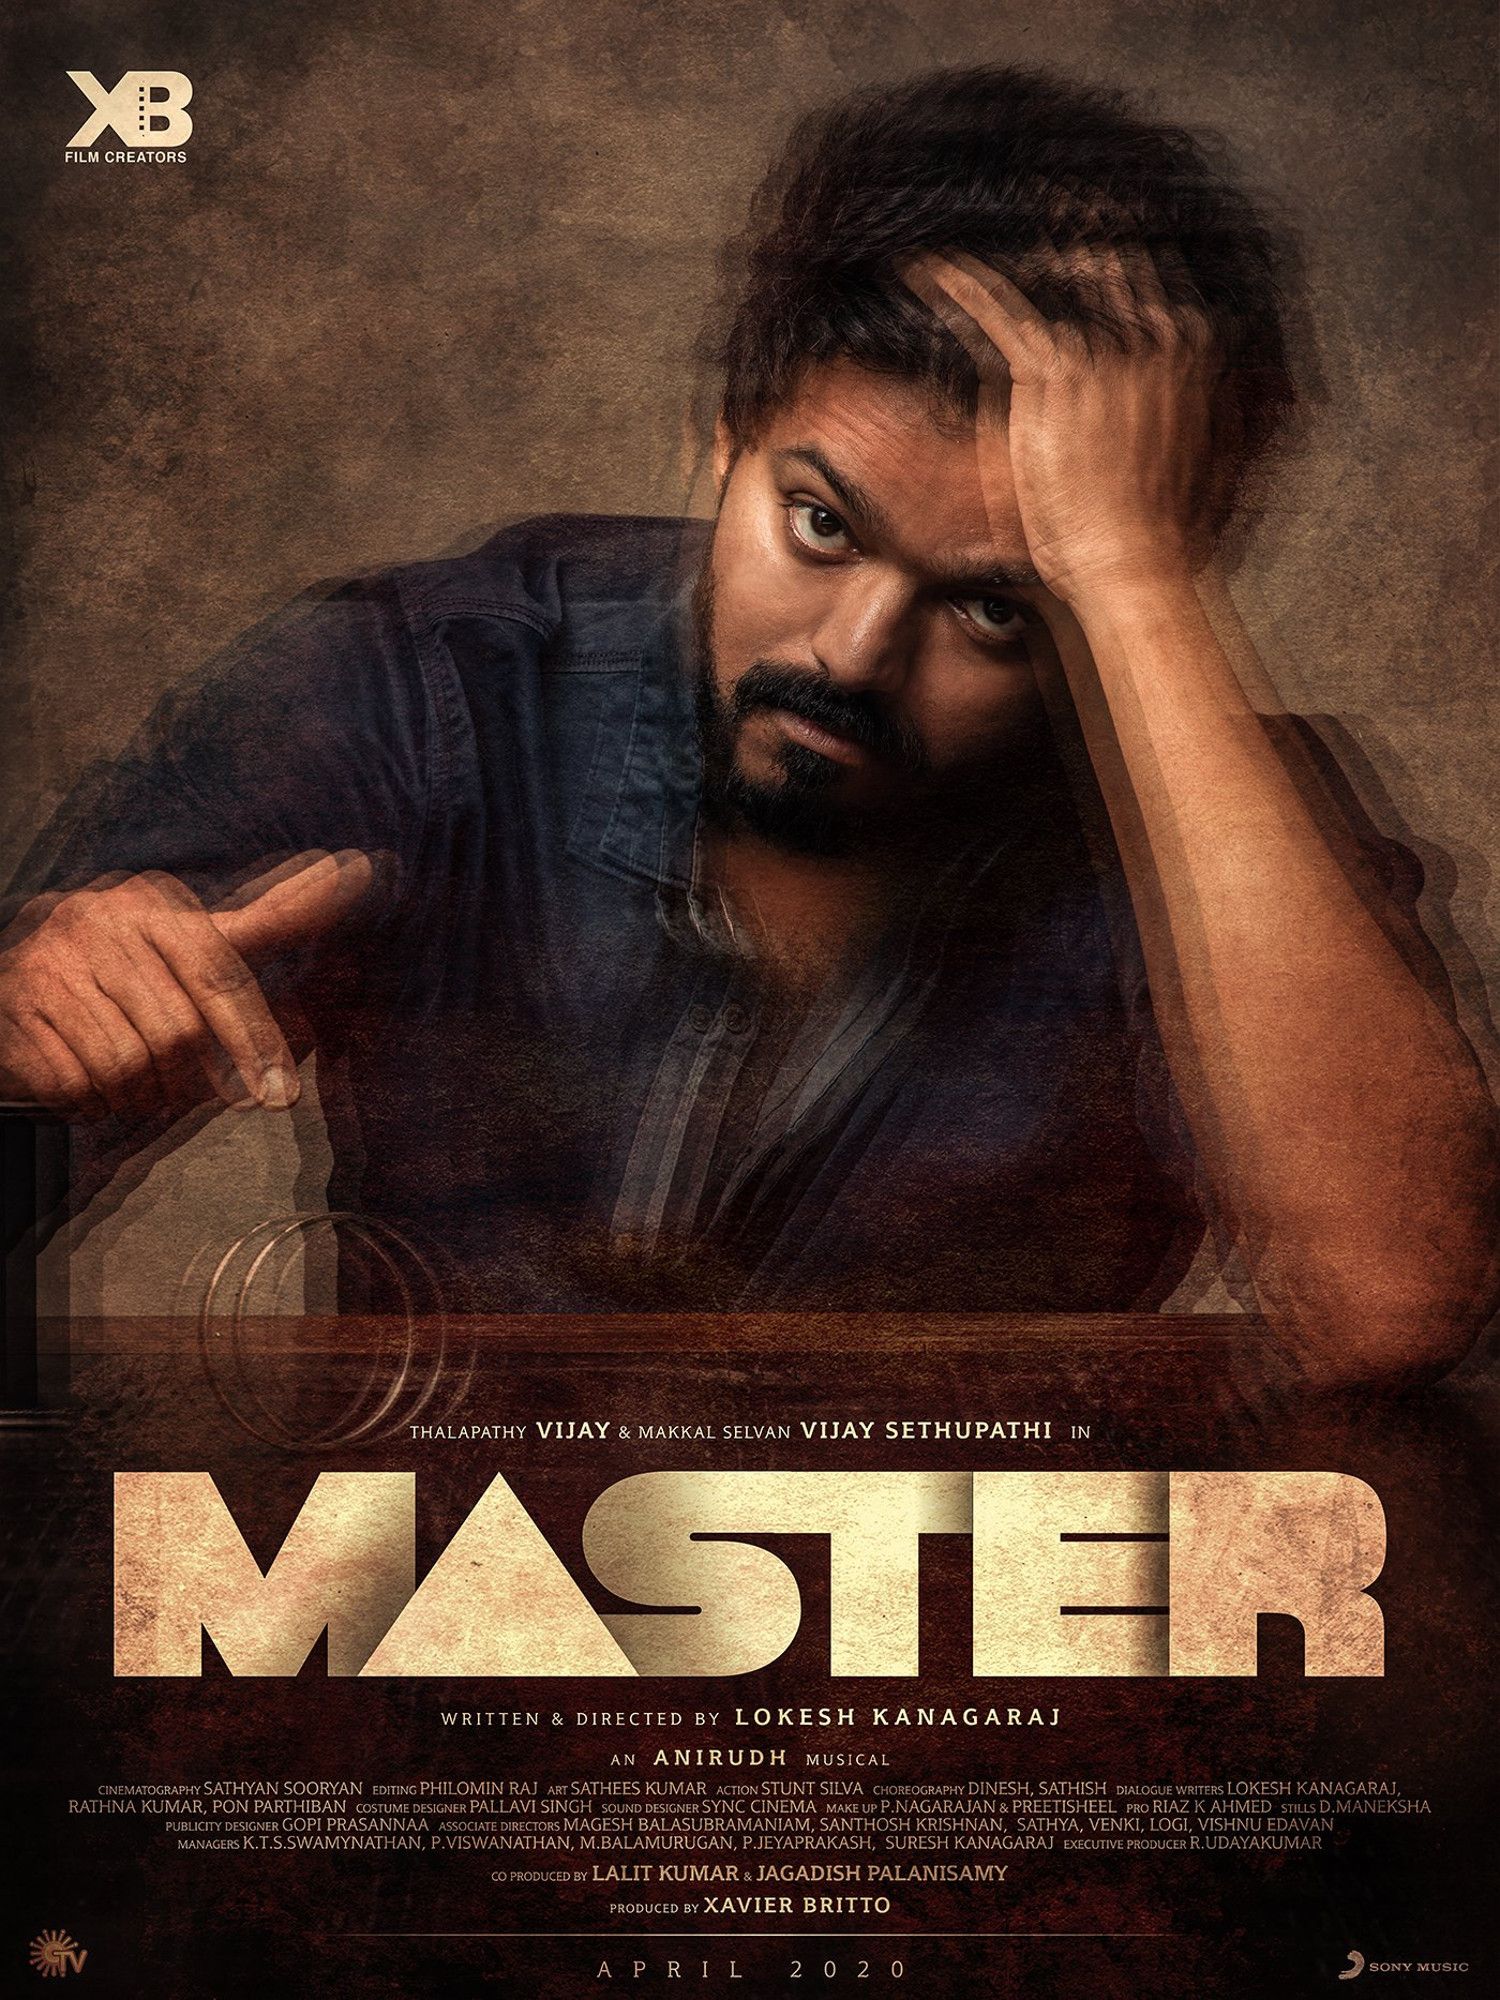 Vijay Master Movie First Look Poster HD. New Movie Posters